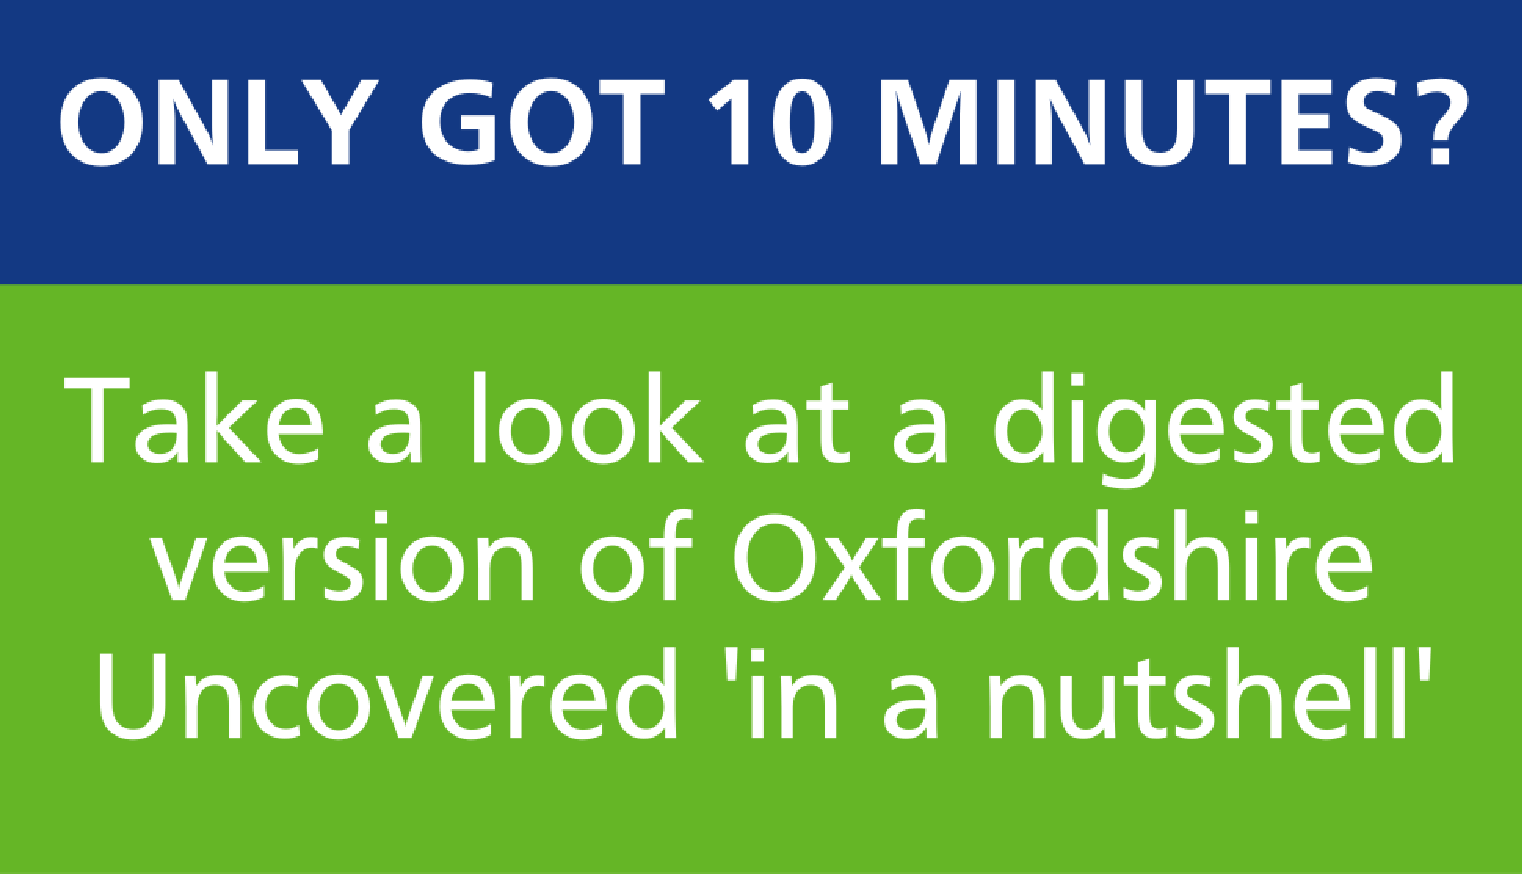 Only got 10 minutes? Take a look at a digested version